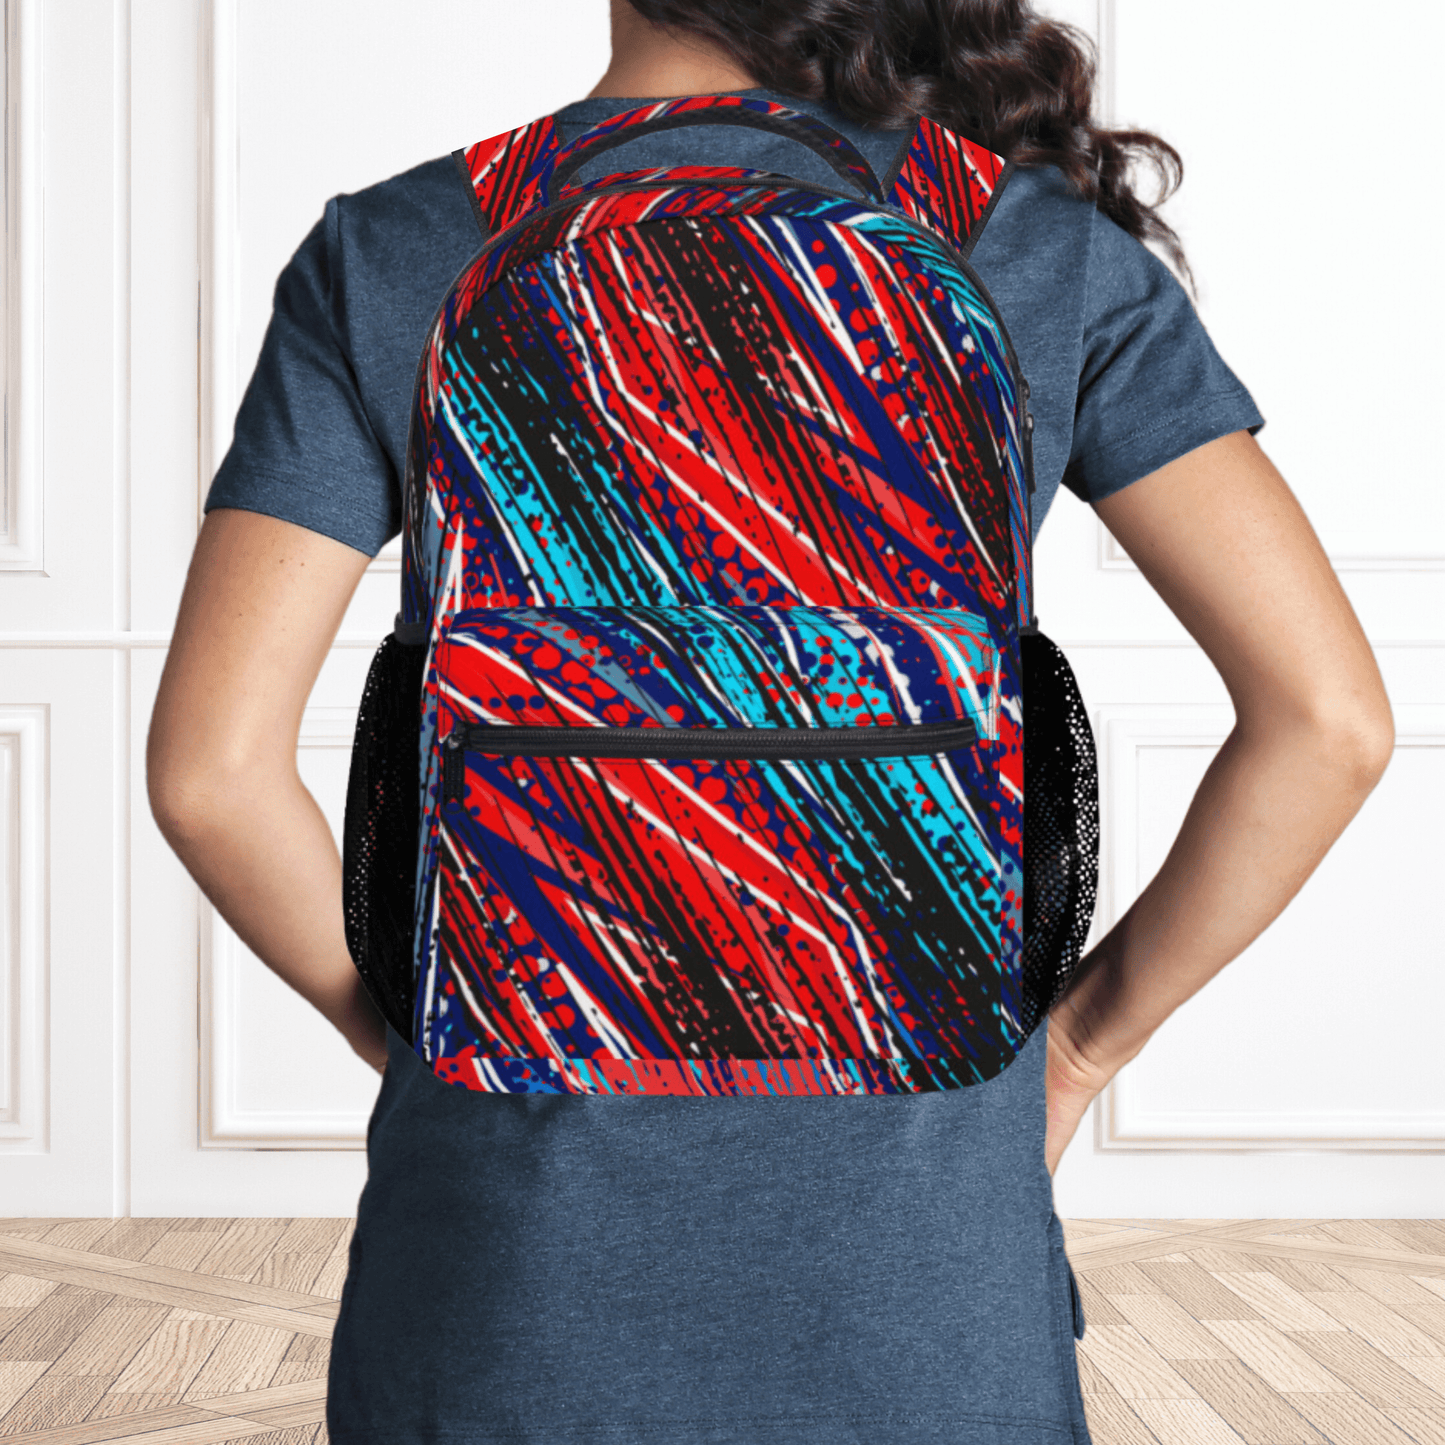 Our paint spatter backpack for kids is black, red and shades of light blue and dark blue and is a custom backpack for boys.